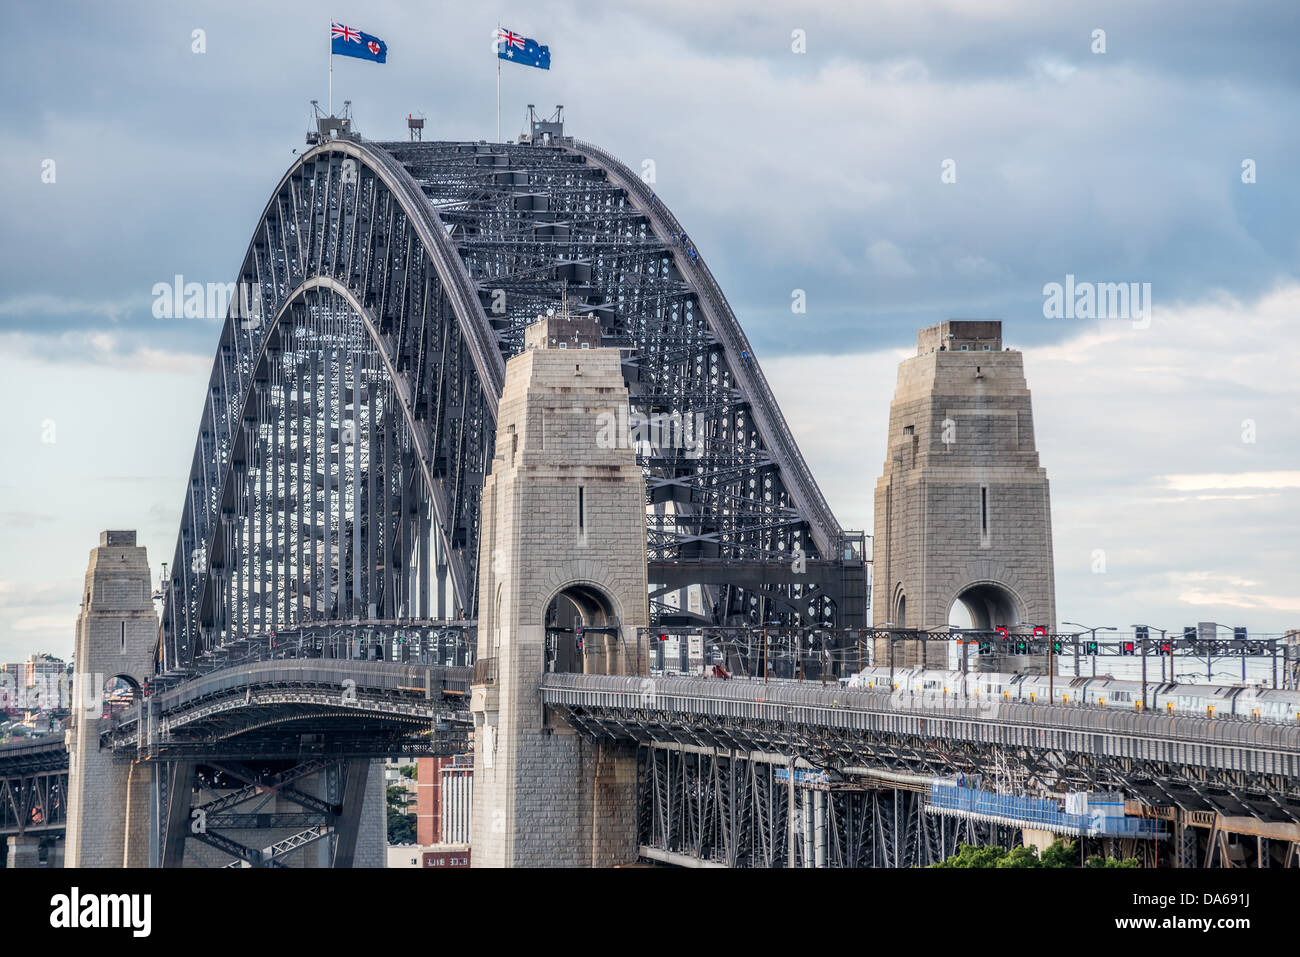 The iconic Sydney Harbour Bridge which spans from downtown to North Sydney. Stock Photo